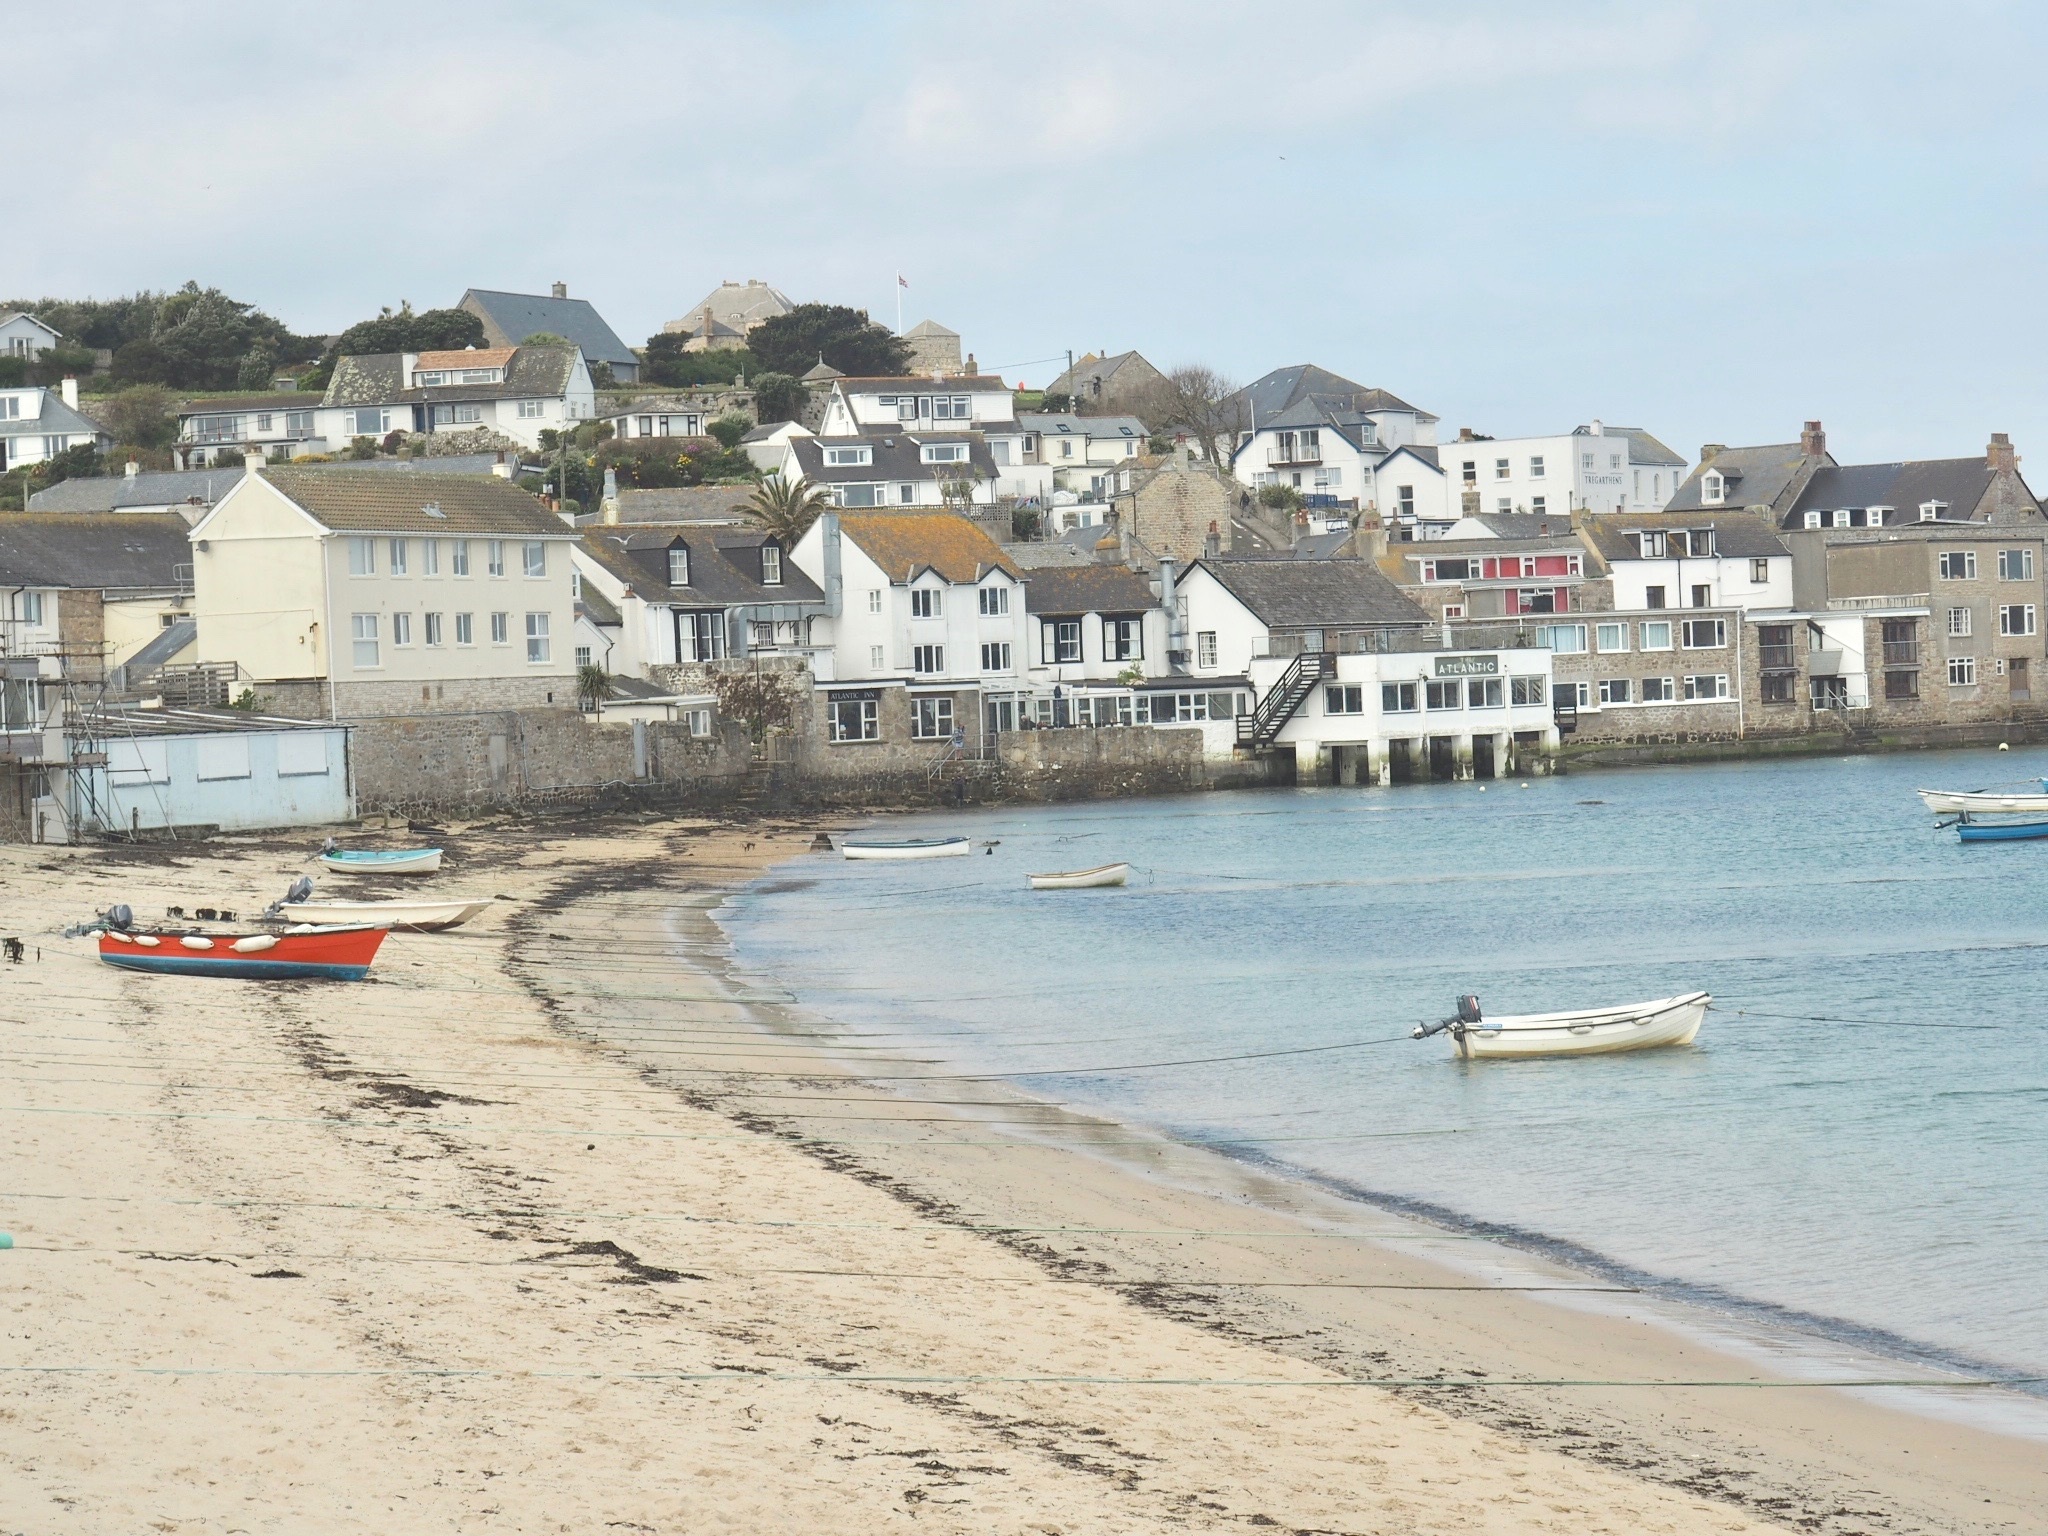 View of Hugh Town, St. Mary's, Scilly Isles.jpg